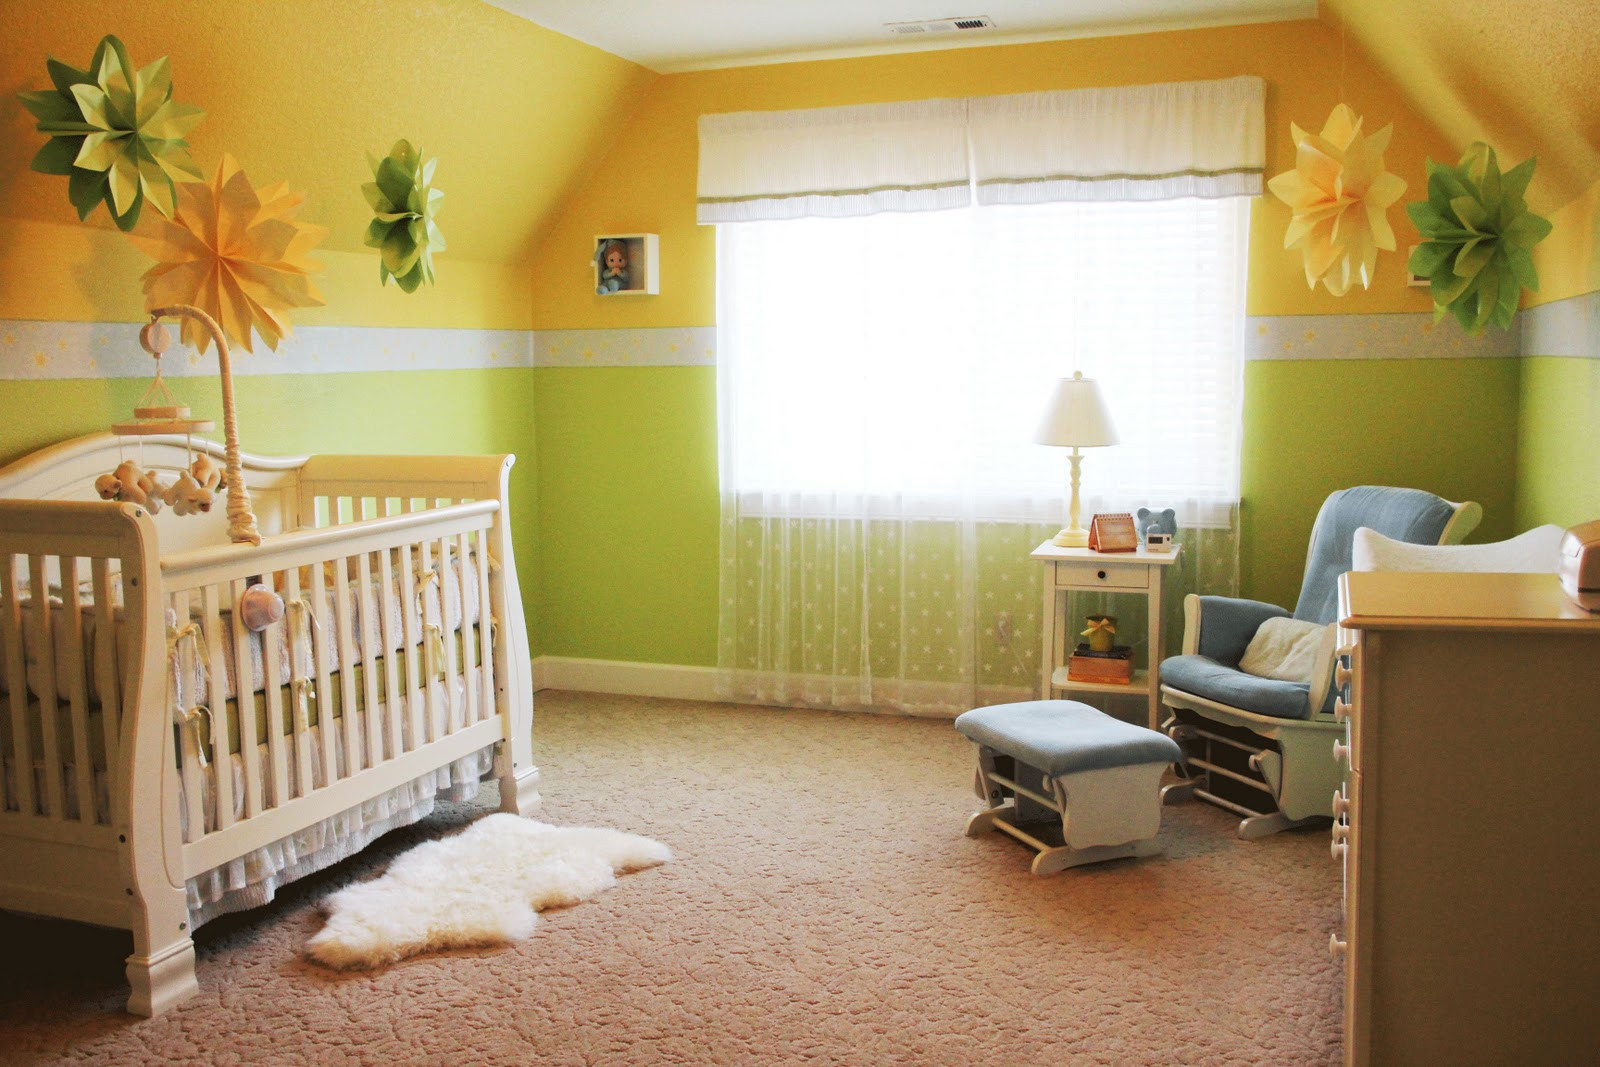 Unisex Baby Room Decorating Ideas
 Designer Rugs Buying Rugs for Kids’ Room